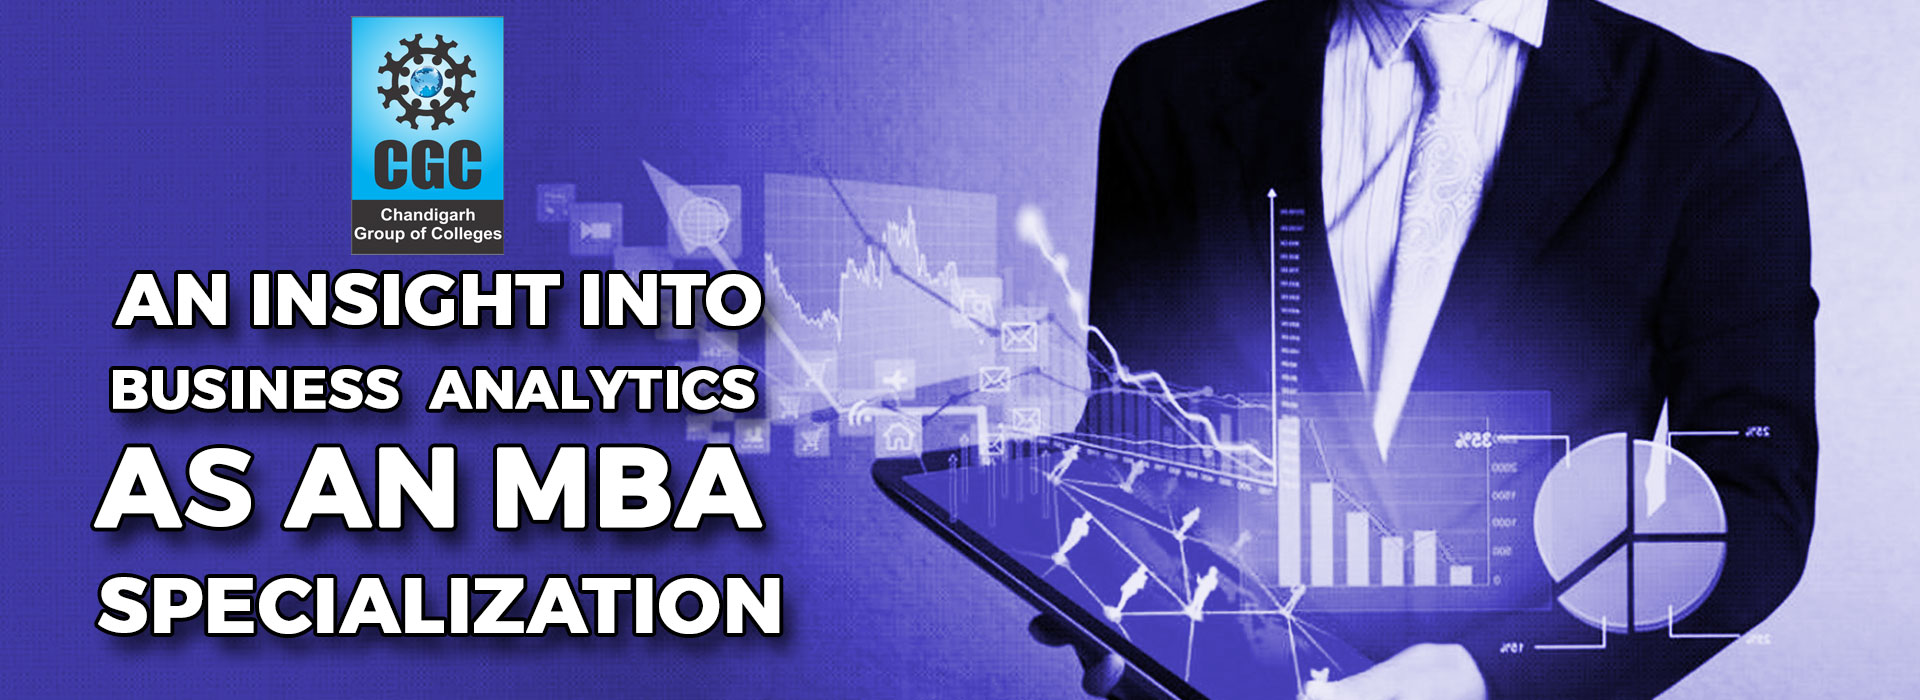 An Insight into Business Analytics as an MBA specialization 